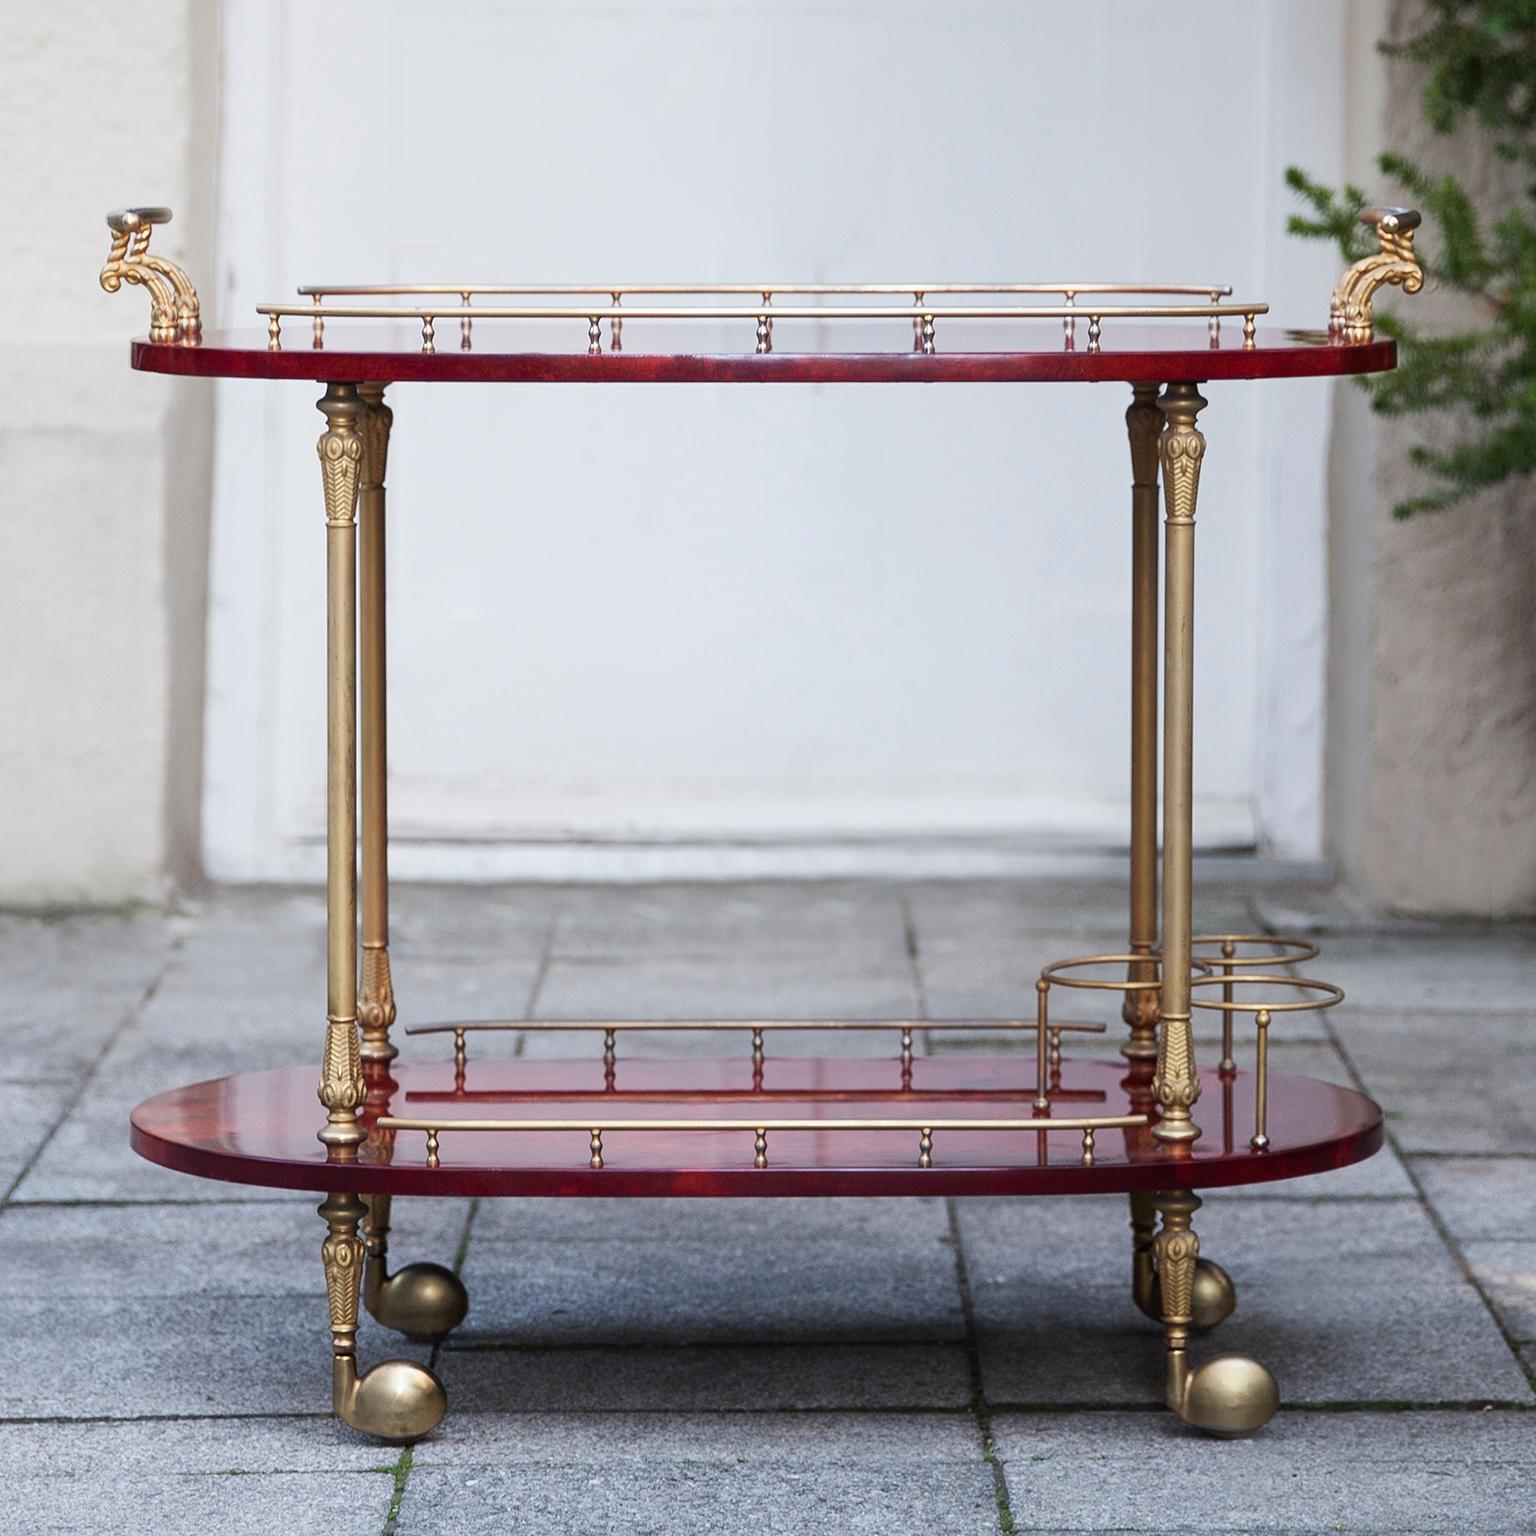 Wonderful bar cart of Aldo Tura in lacquered goatskin.
This serving cart was executed, circa 1960 in a red parchment. Along with artists like Piero Fornasetti and Carlo Bugatti, Aldo Tura (1909-1963) definitely belonged to the mavericks of Italian